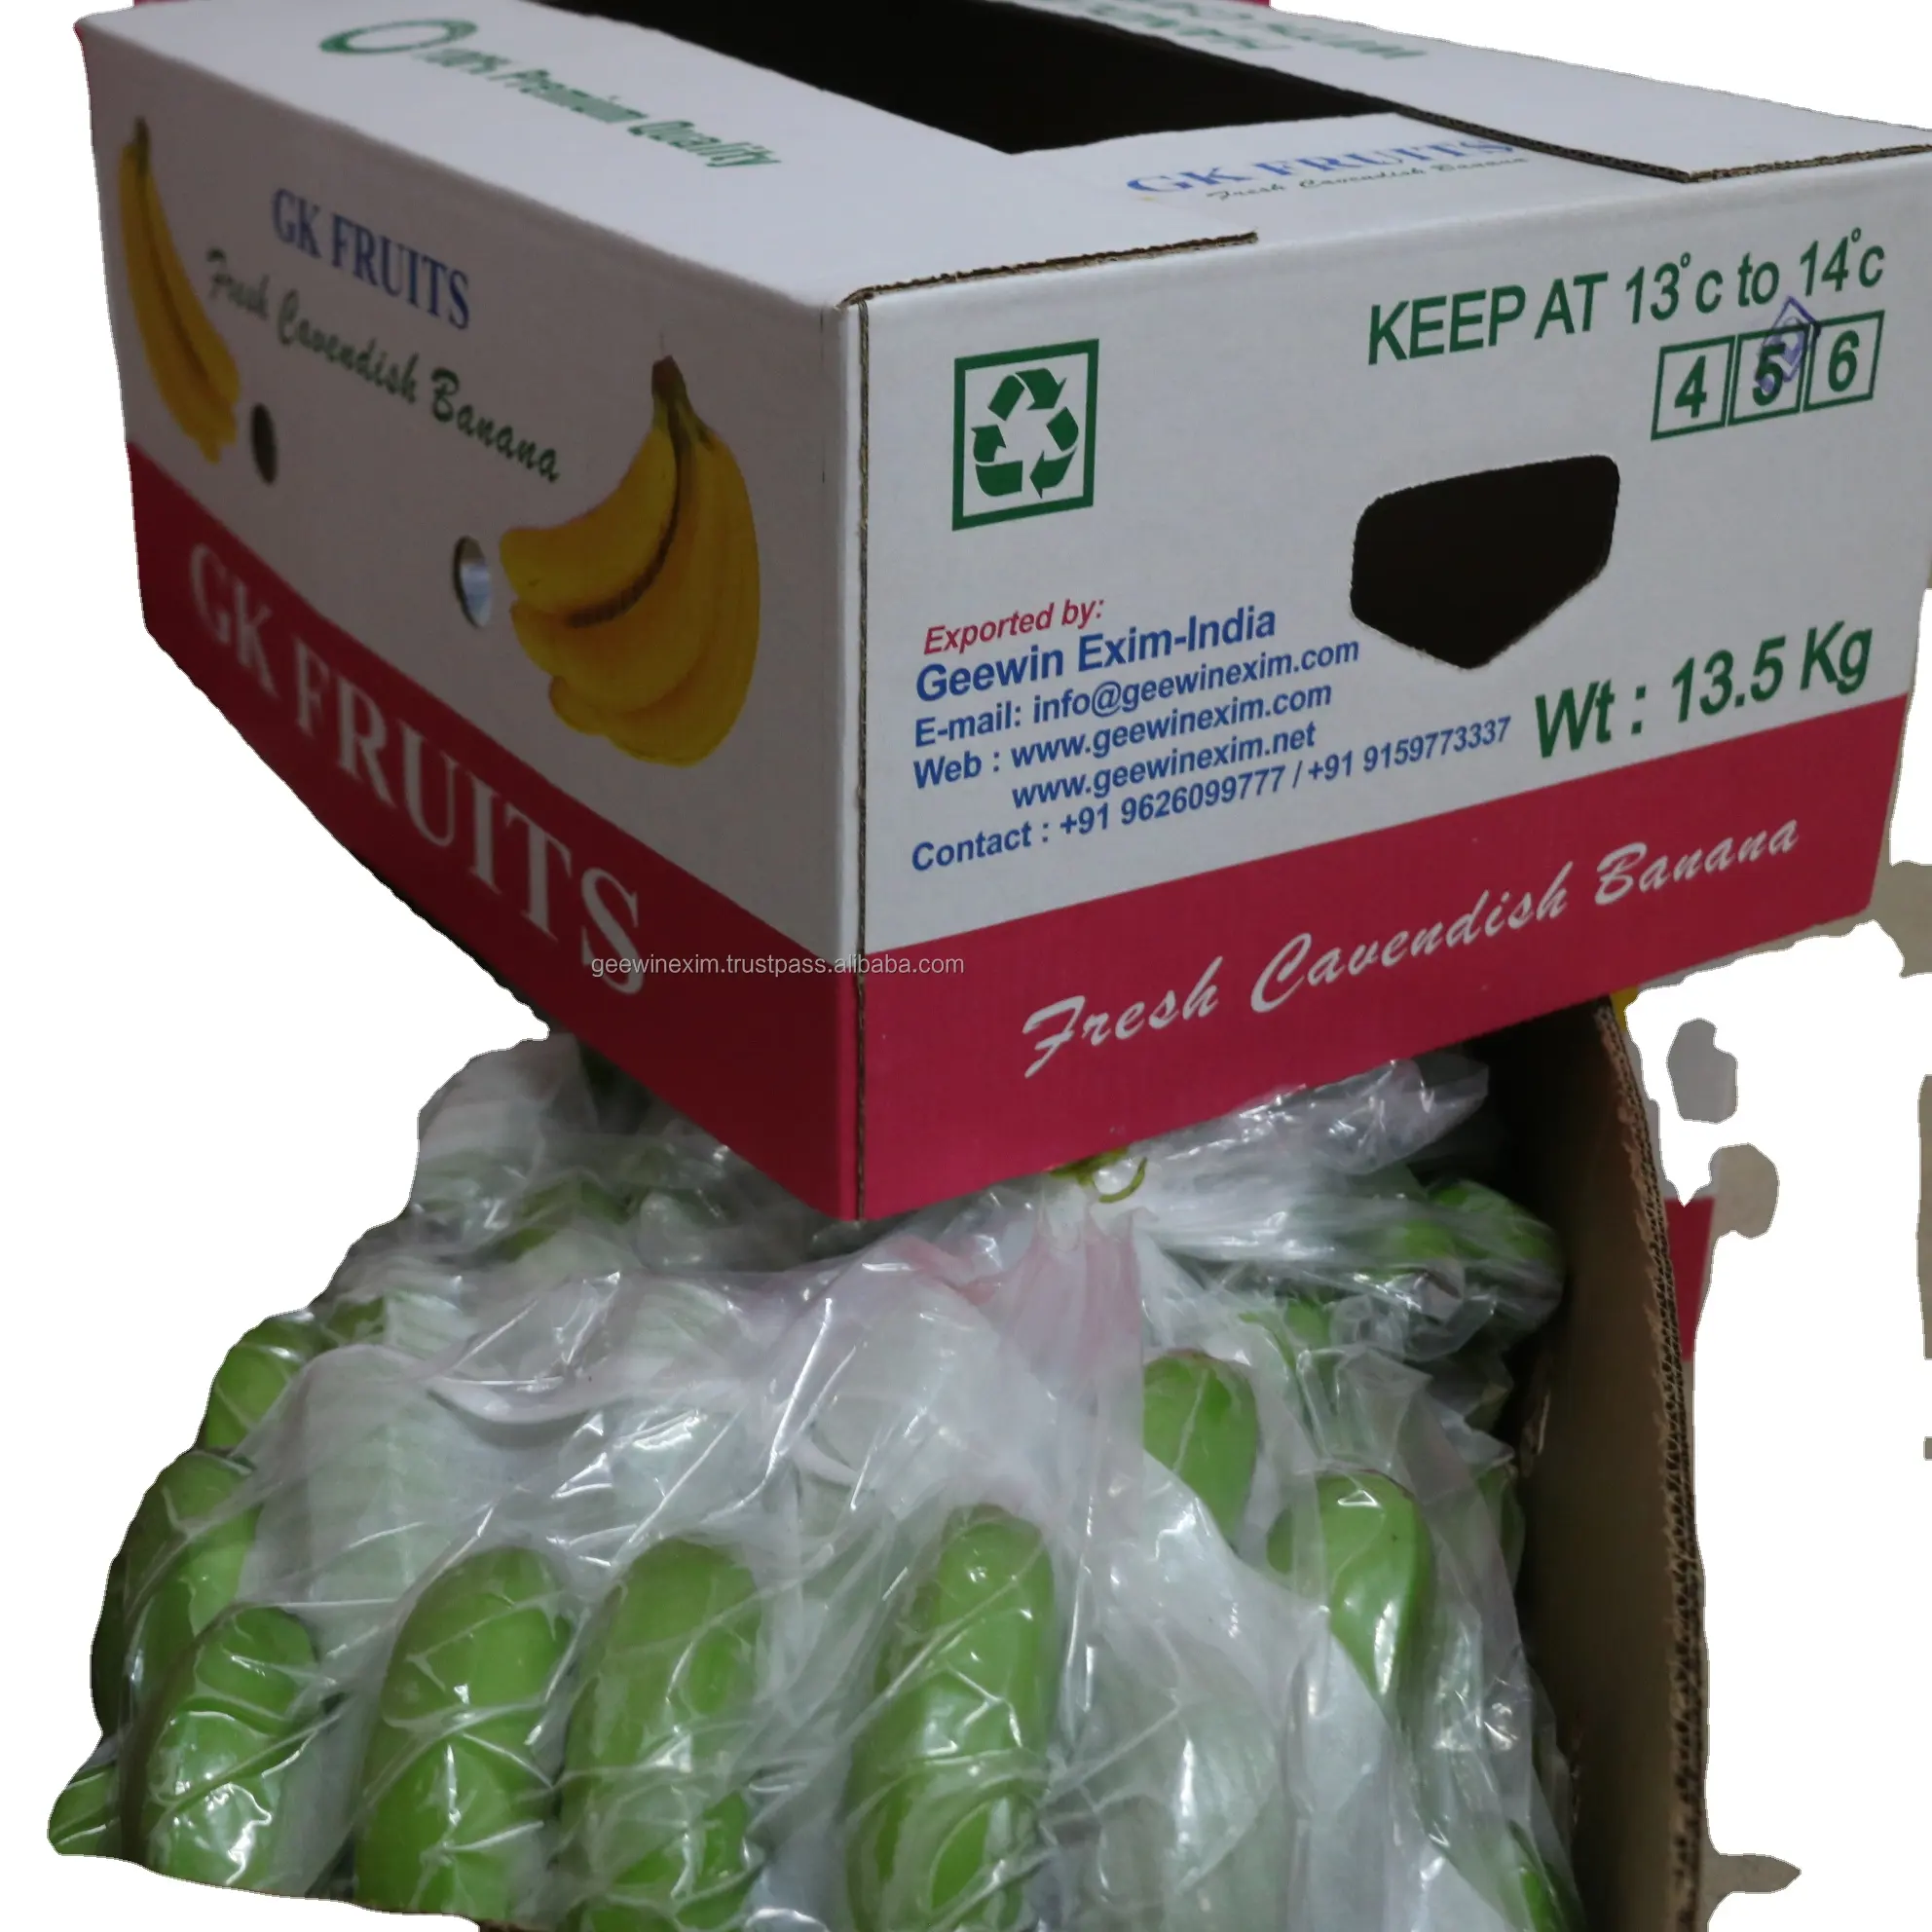 BANANAS from ECUADOR Yellow Green PREMIUM Tropical BANANA Style Cavendish Color Weight Origin Type Certificate Quality Variety